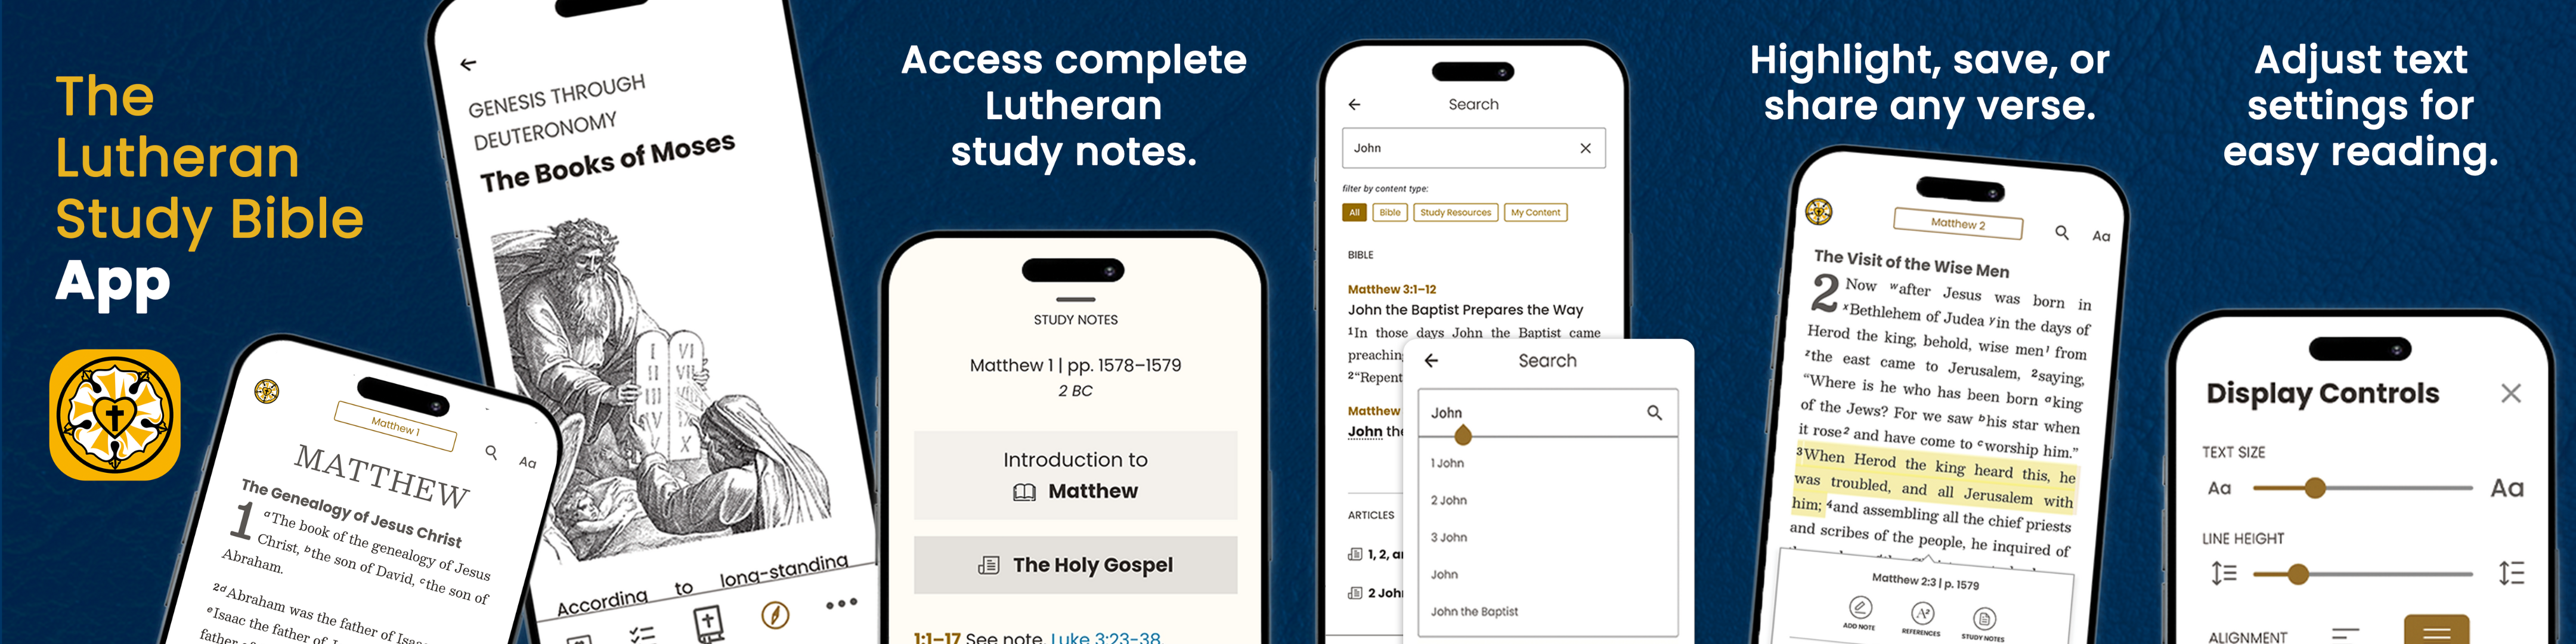 Press Release: The Lutheran Study Bible App Is Now Available